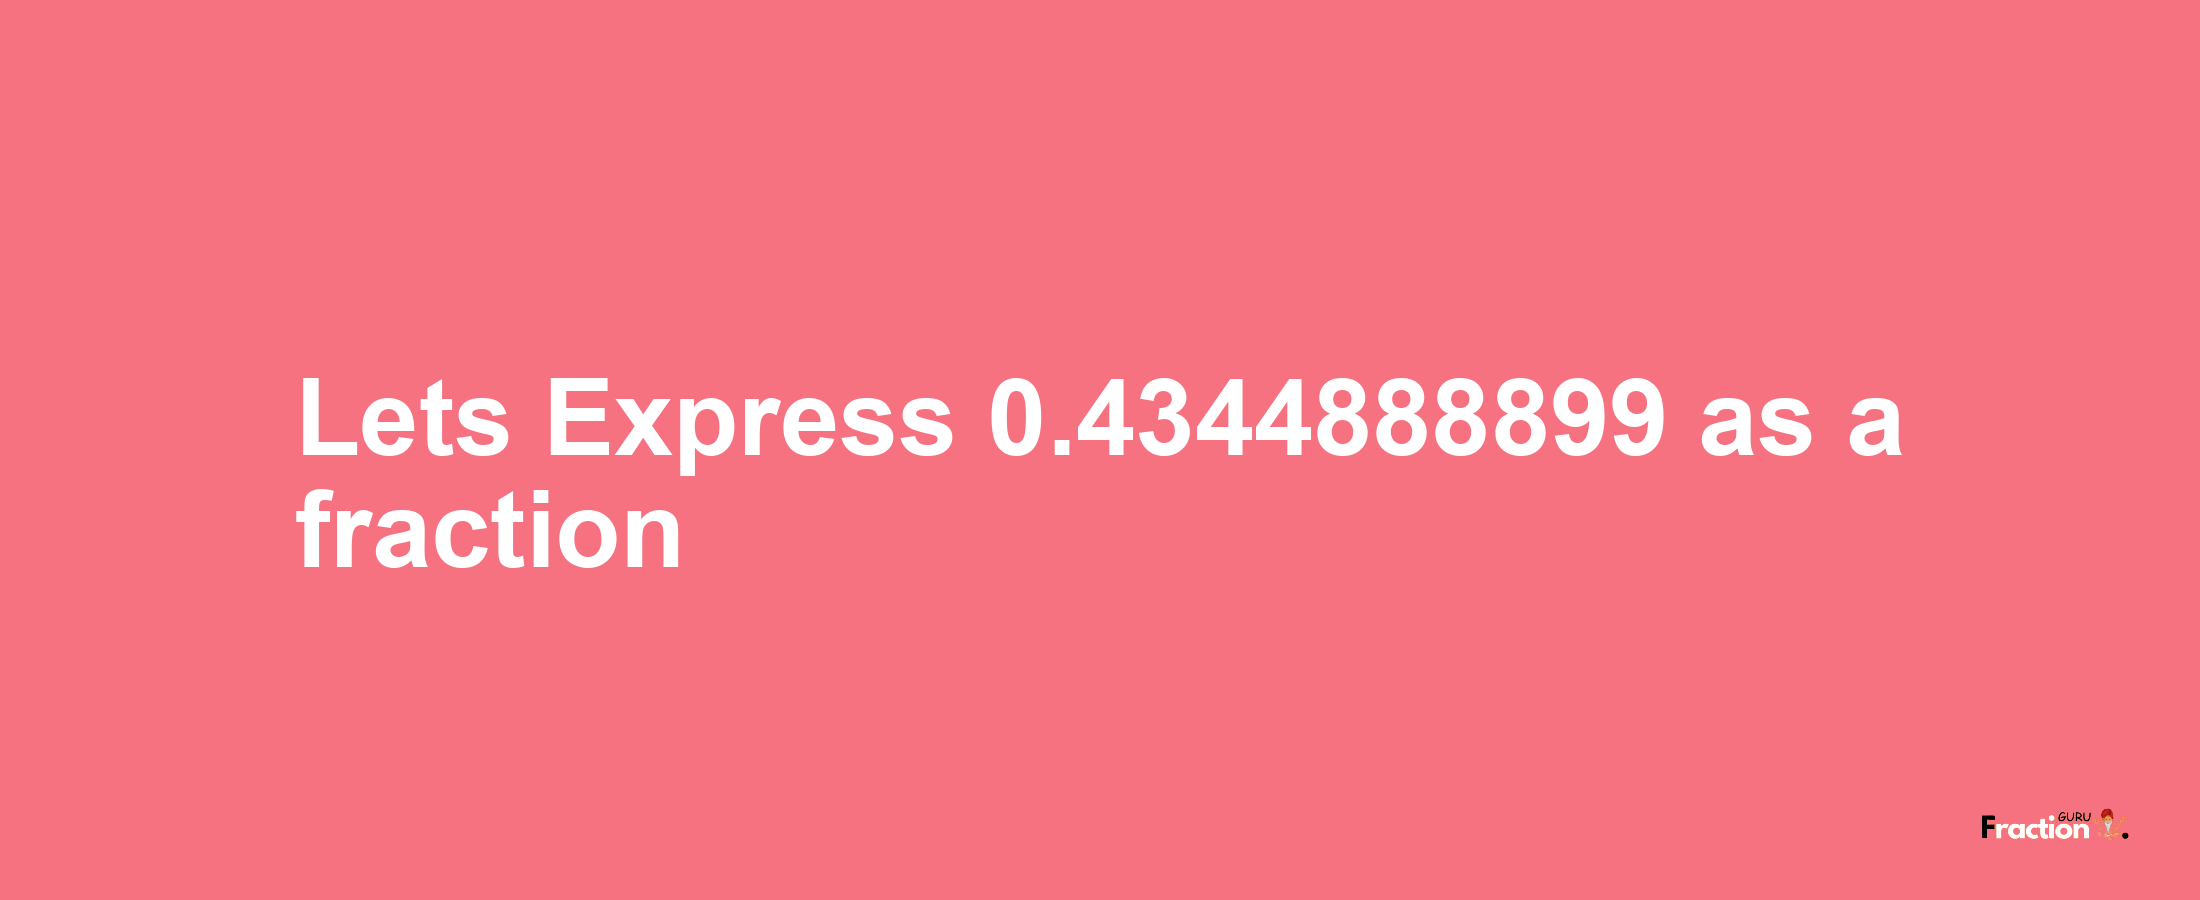 Lets Express 0.4344888899 as afraction